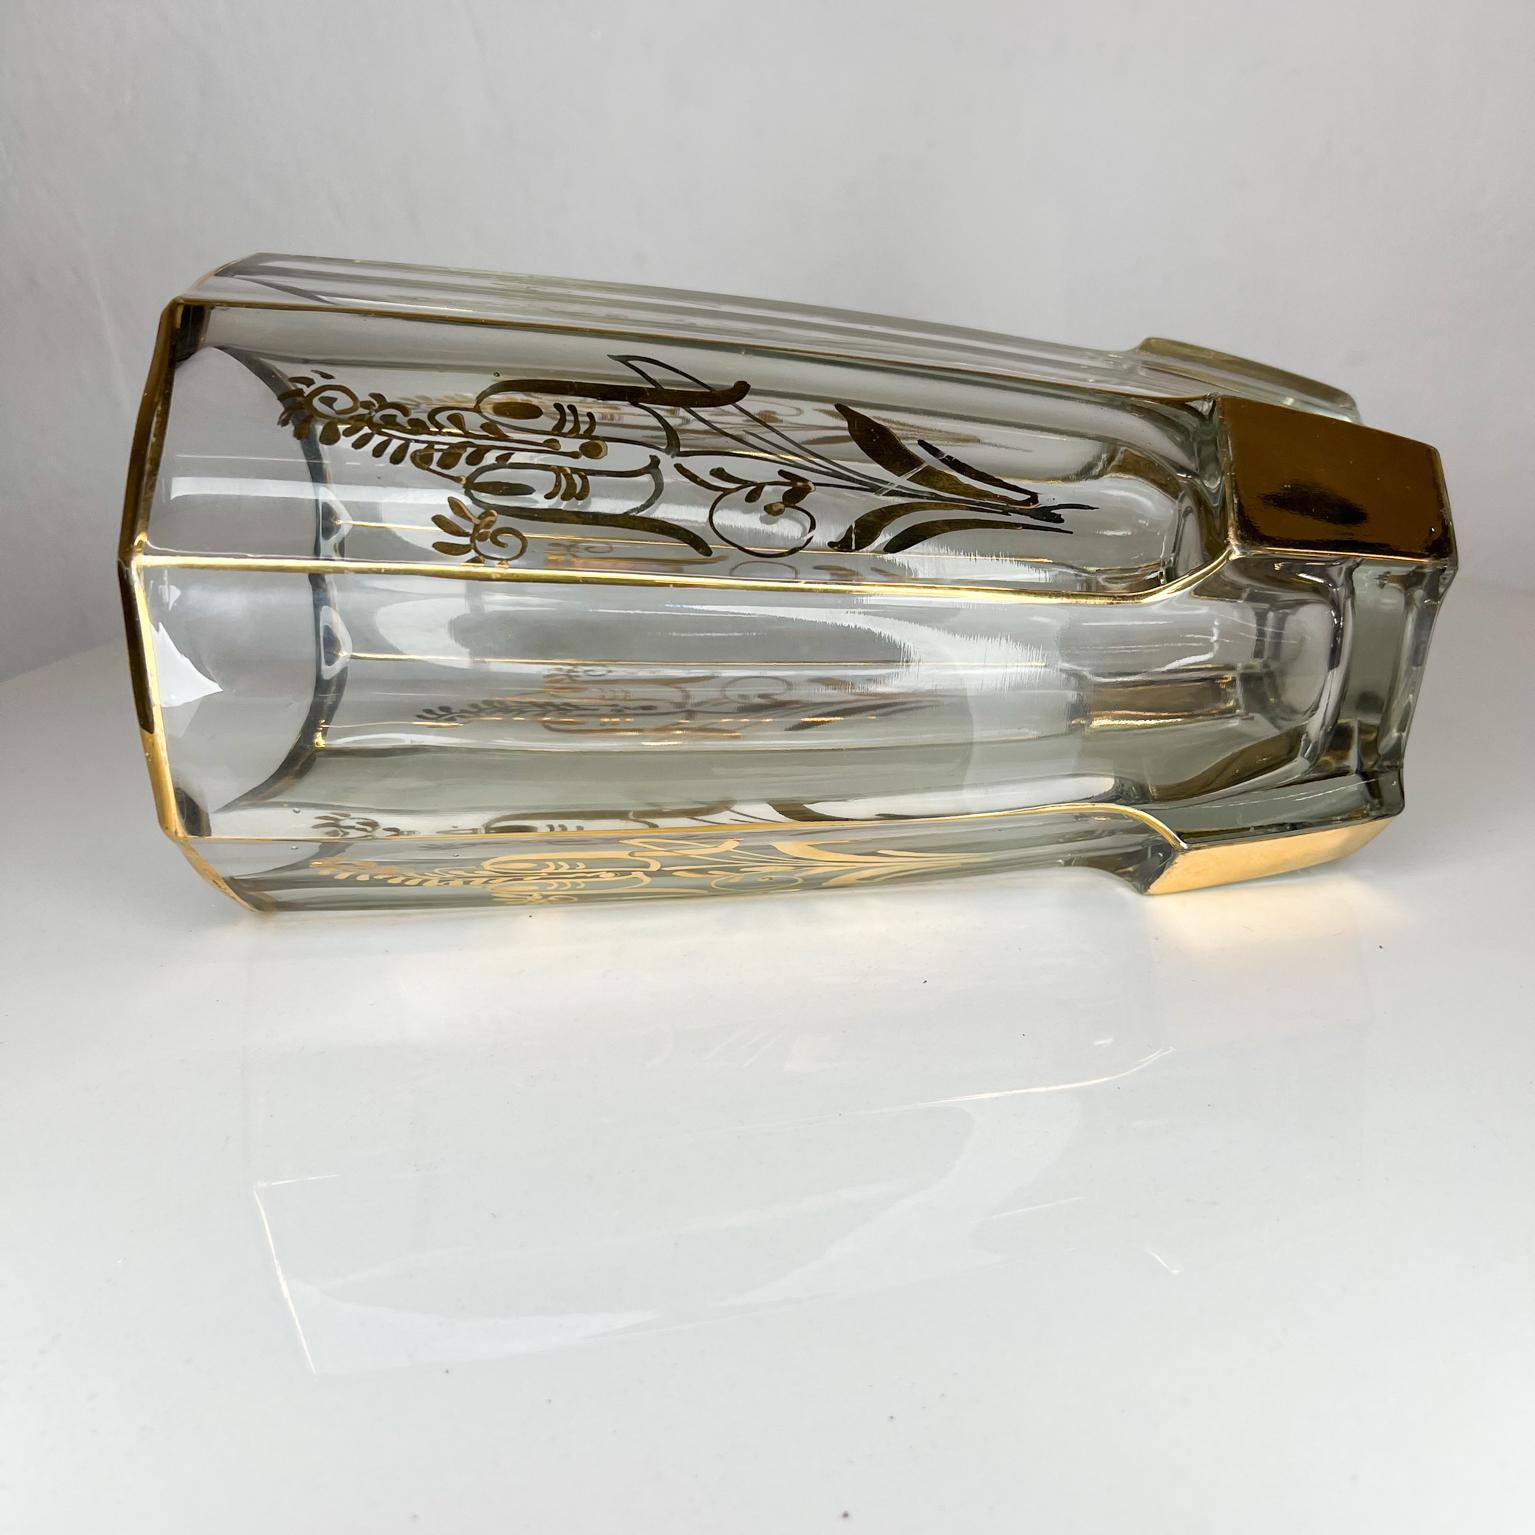 1960s Modern Hollywood Regency Stunning Glass Vase with Gold Painted Motif 5